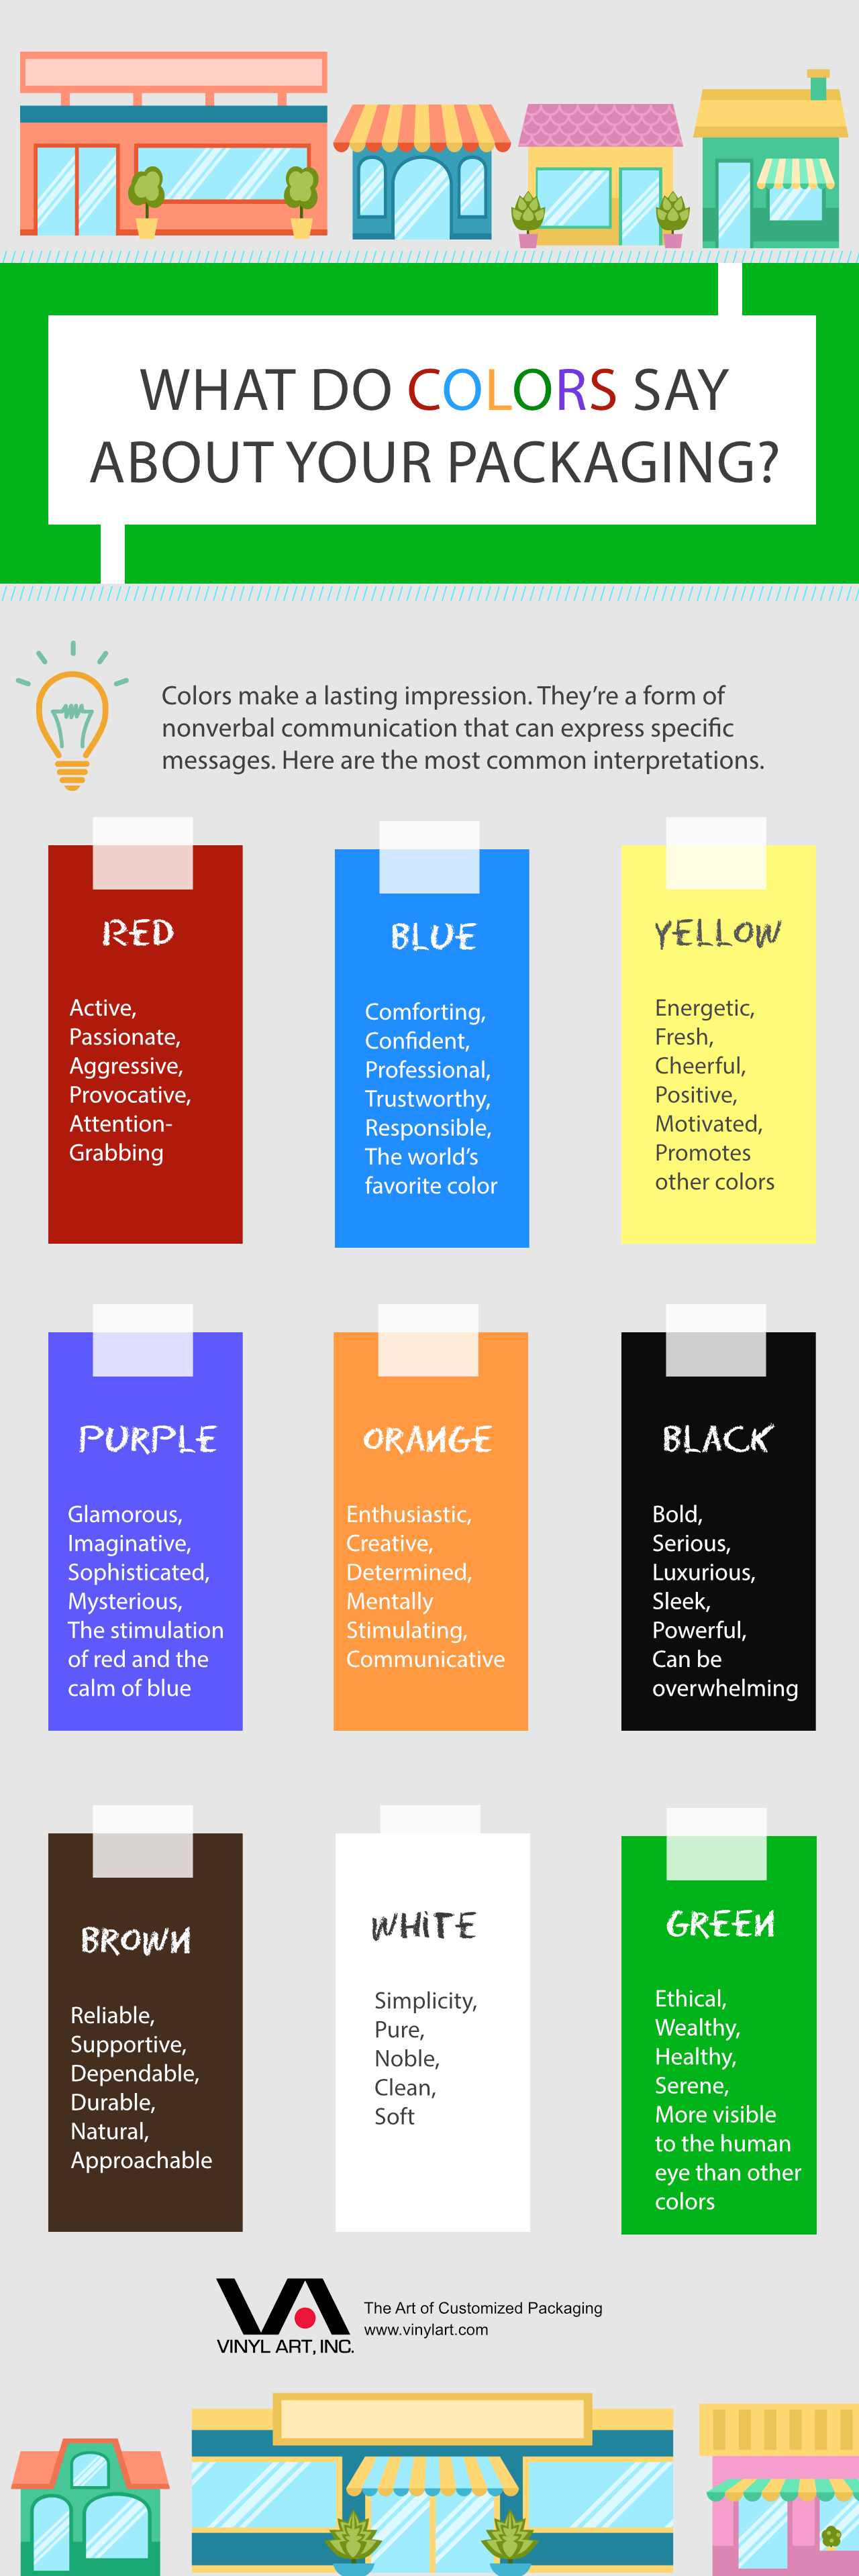 What Does Color Say About Your Packaging Choices?